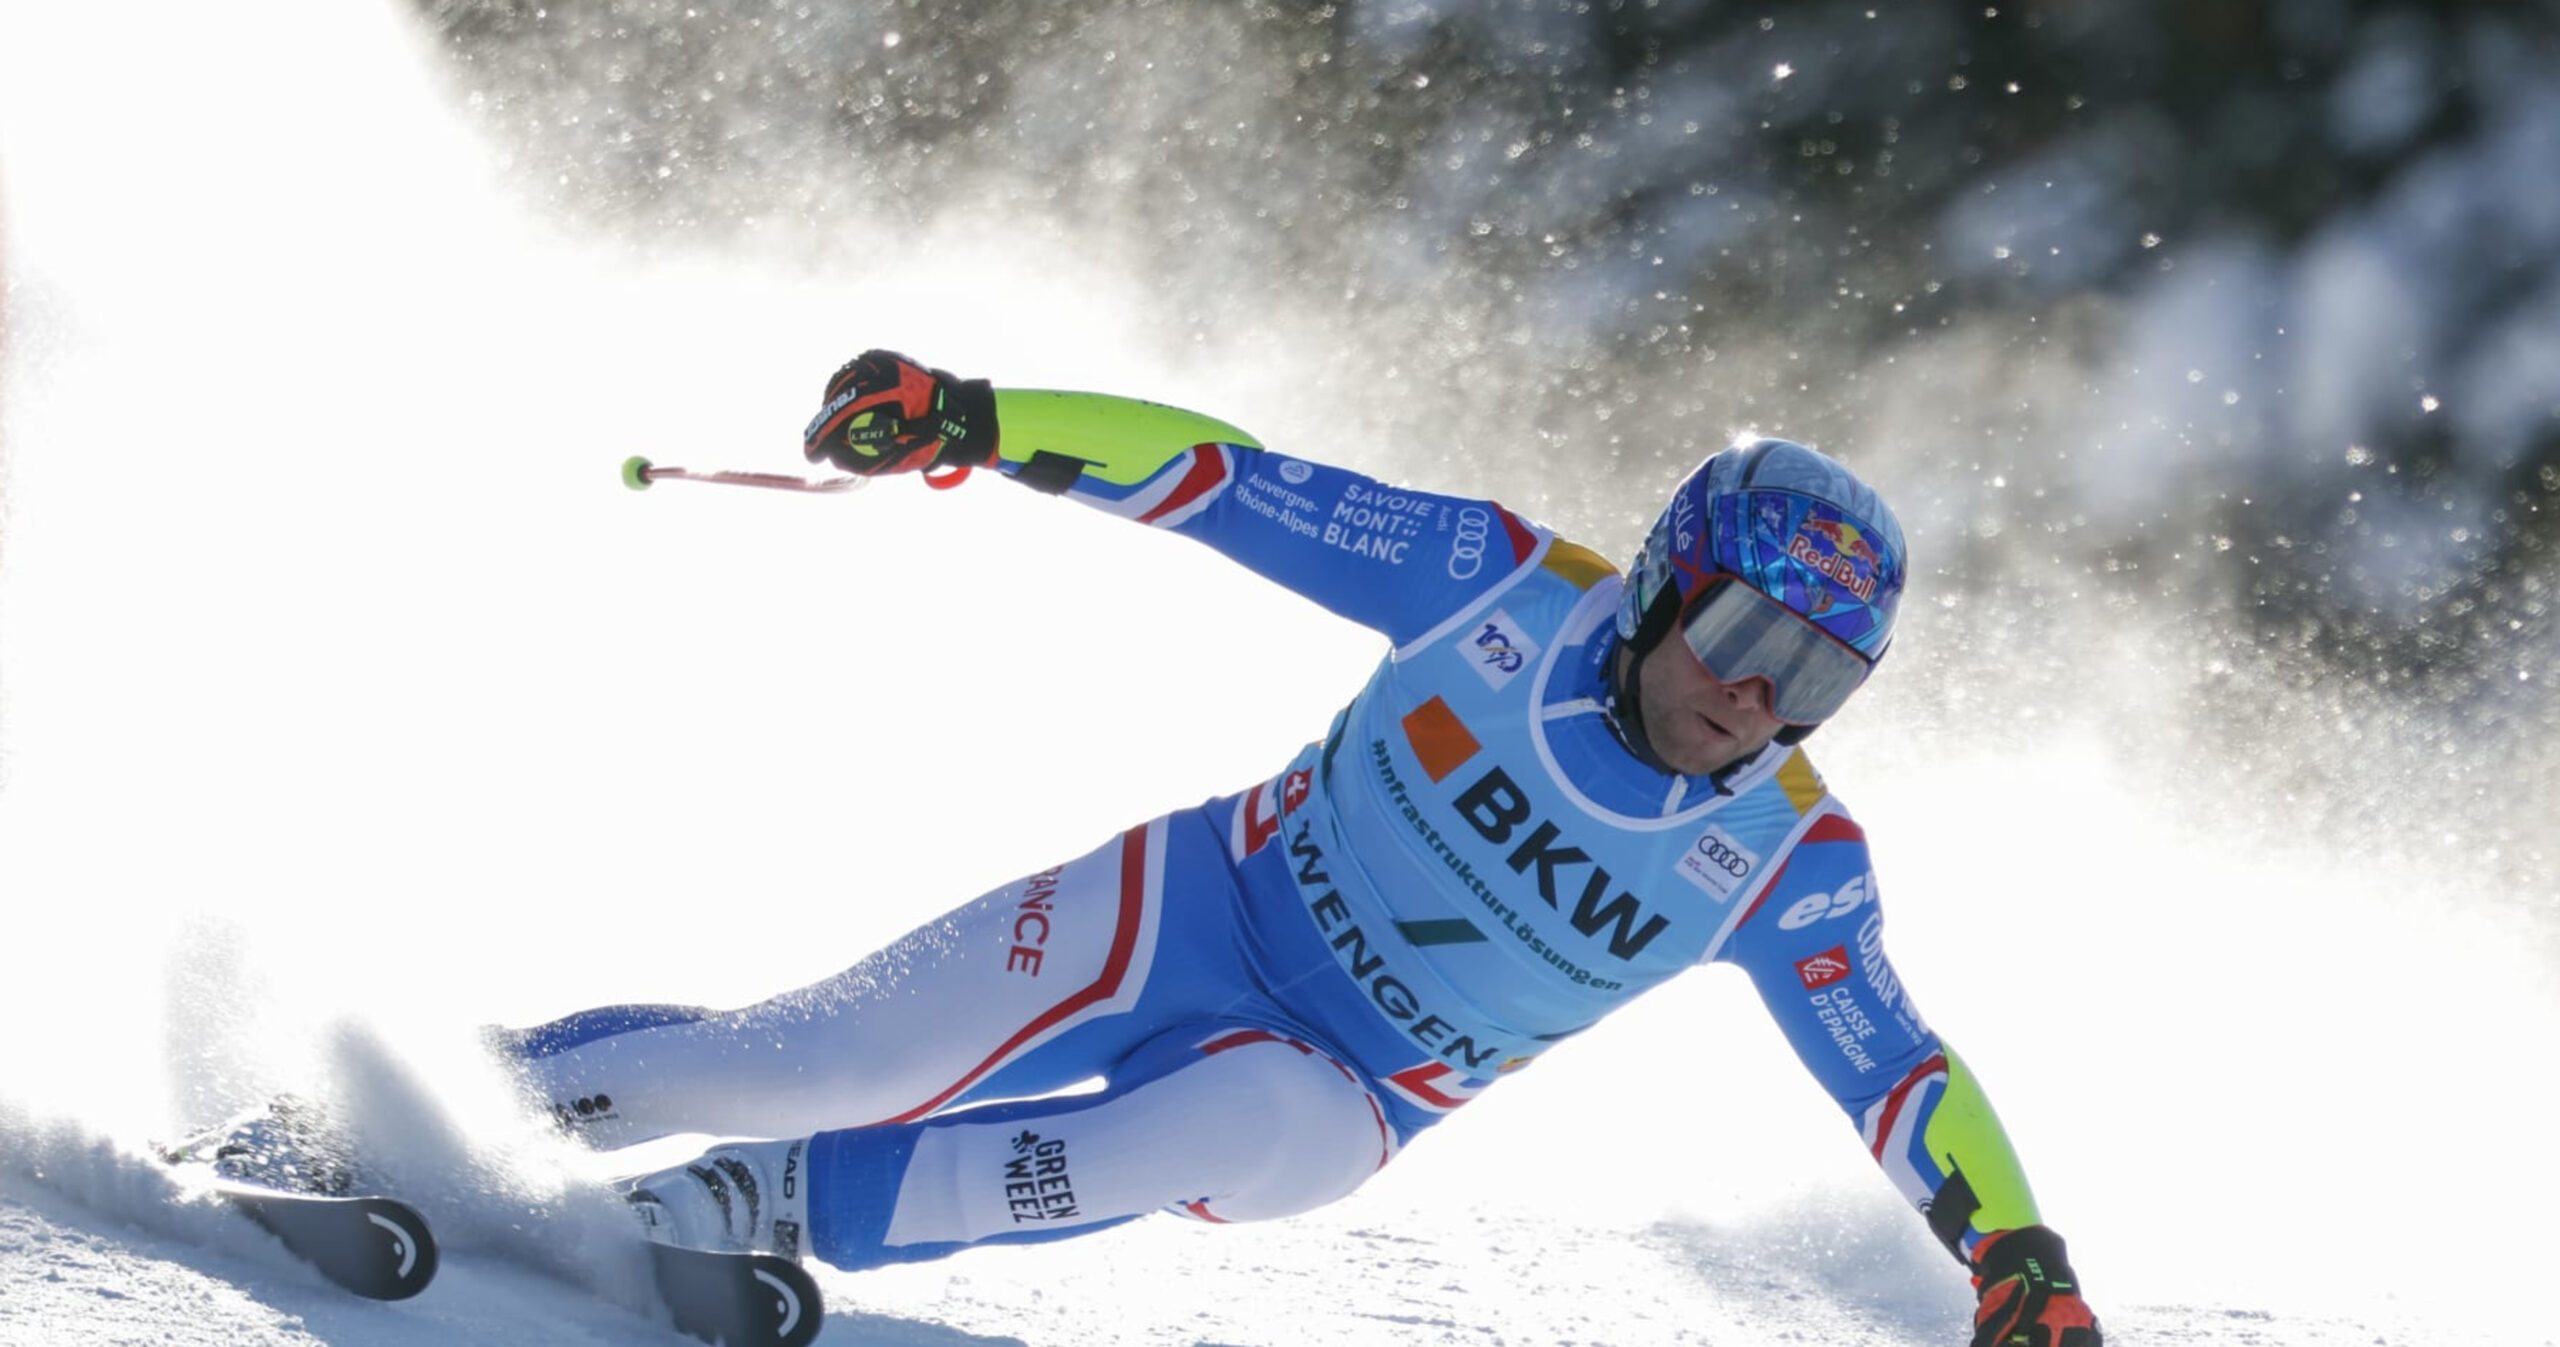 French Skier Alexis Pinturault Airlifted from Course After Crash in World Cup Race